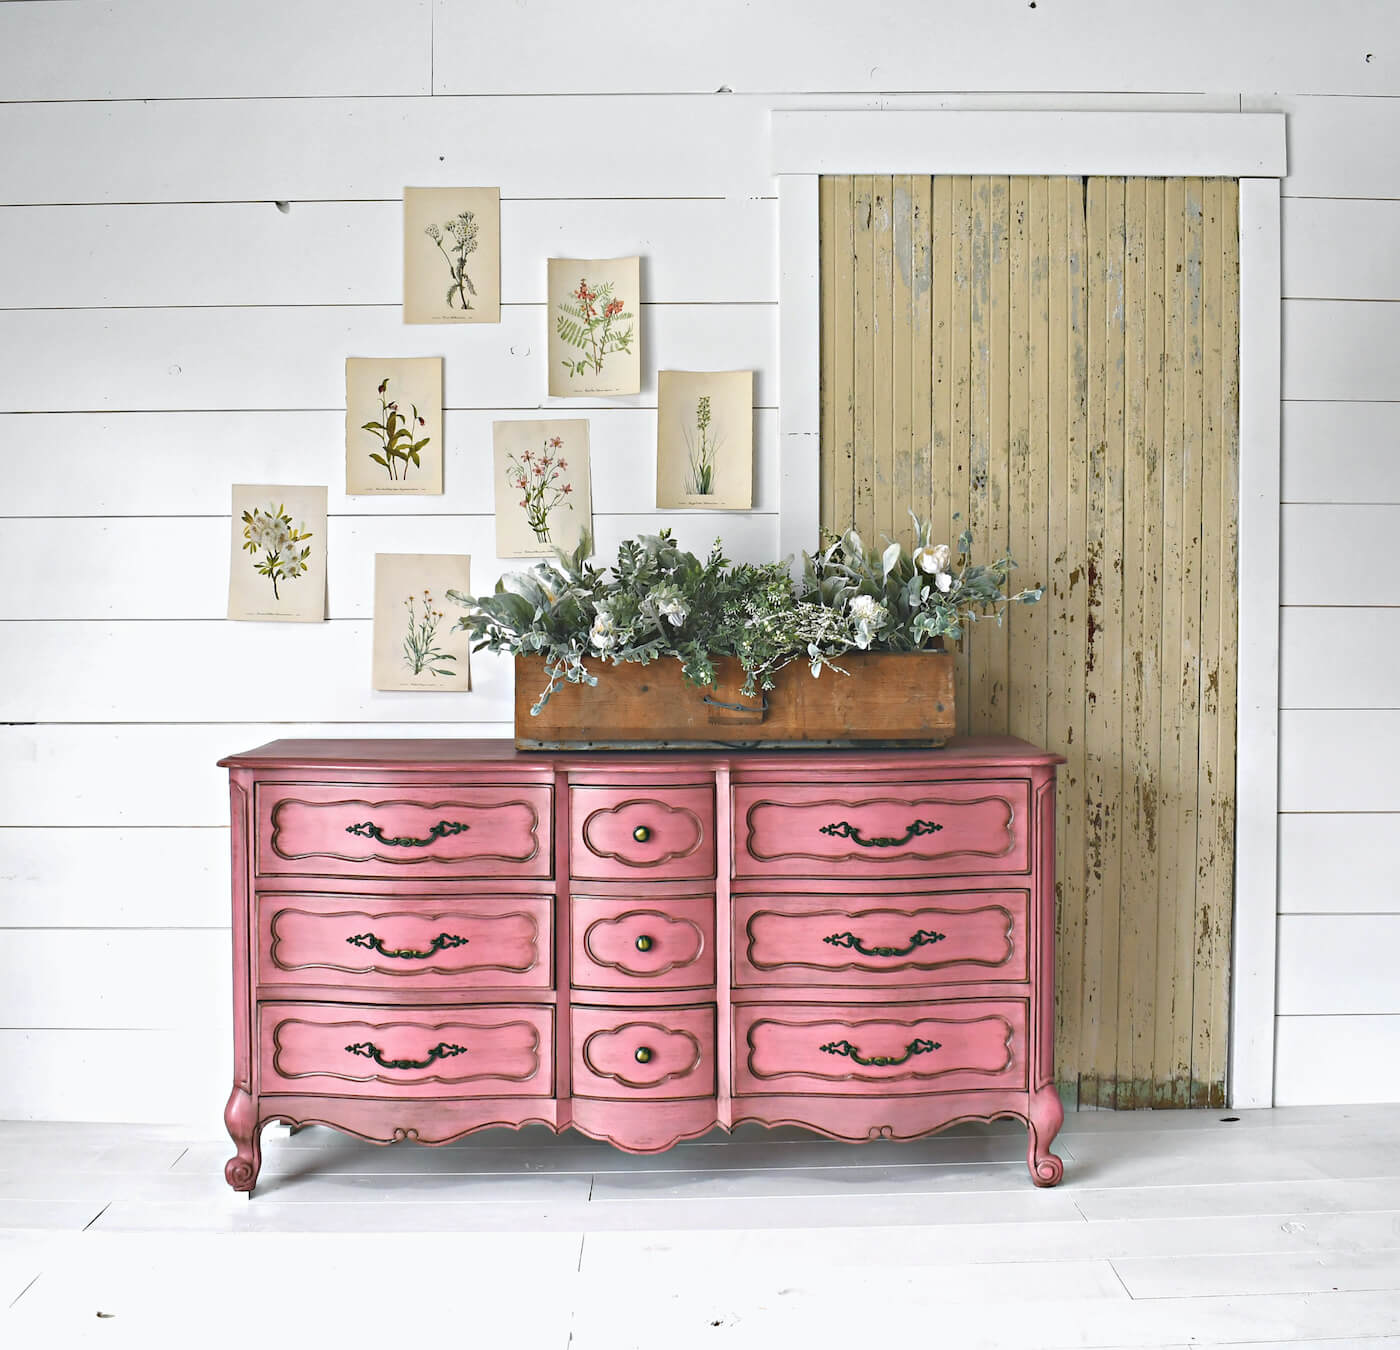 Finished pink painted dresser, upcycled with vintage farmhouse style